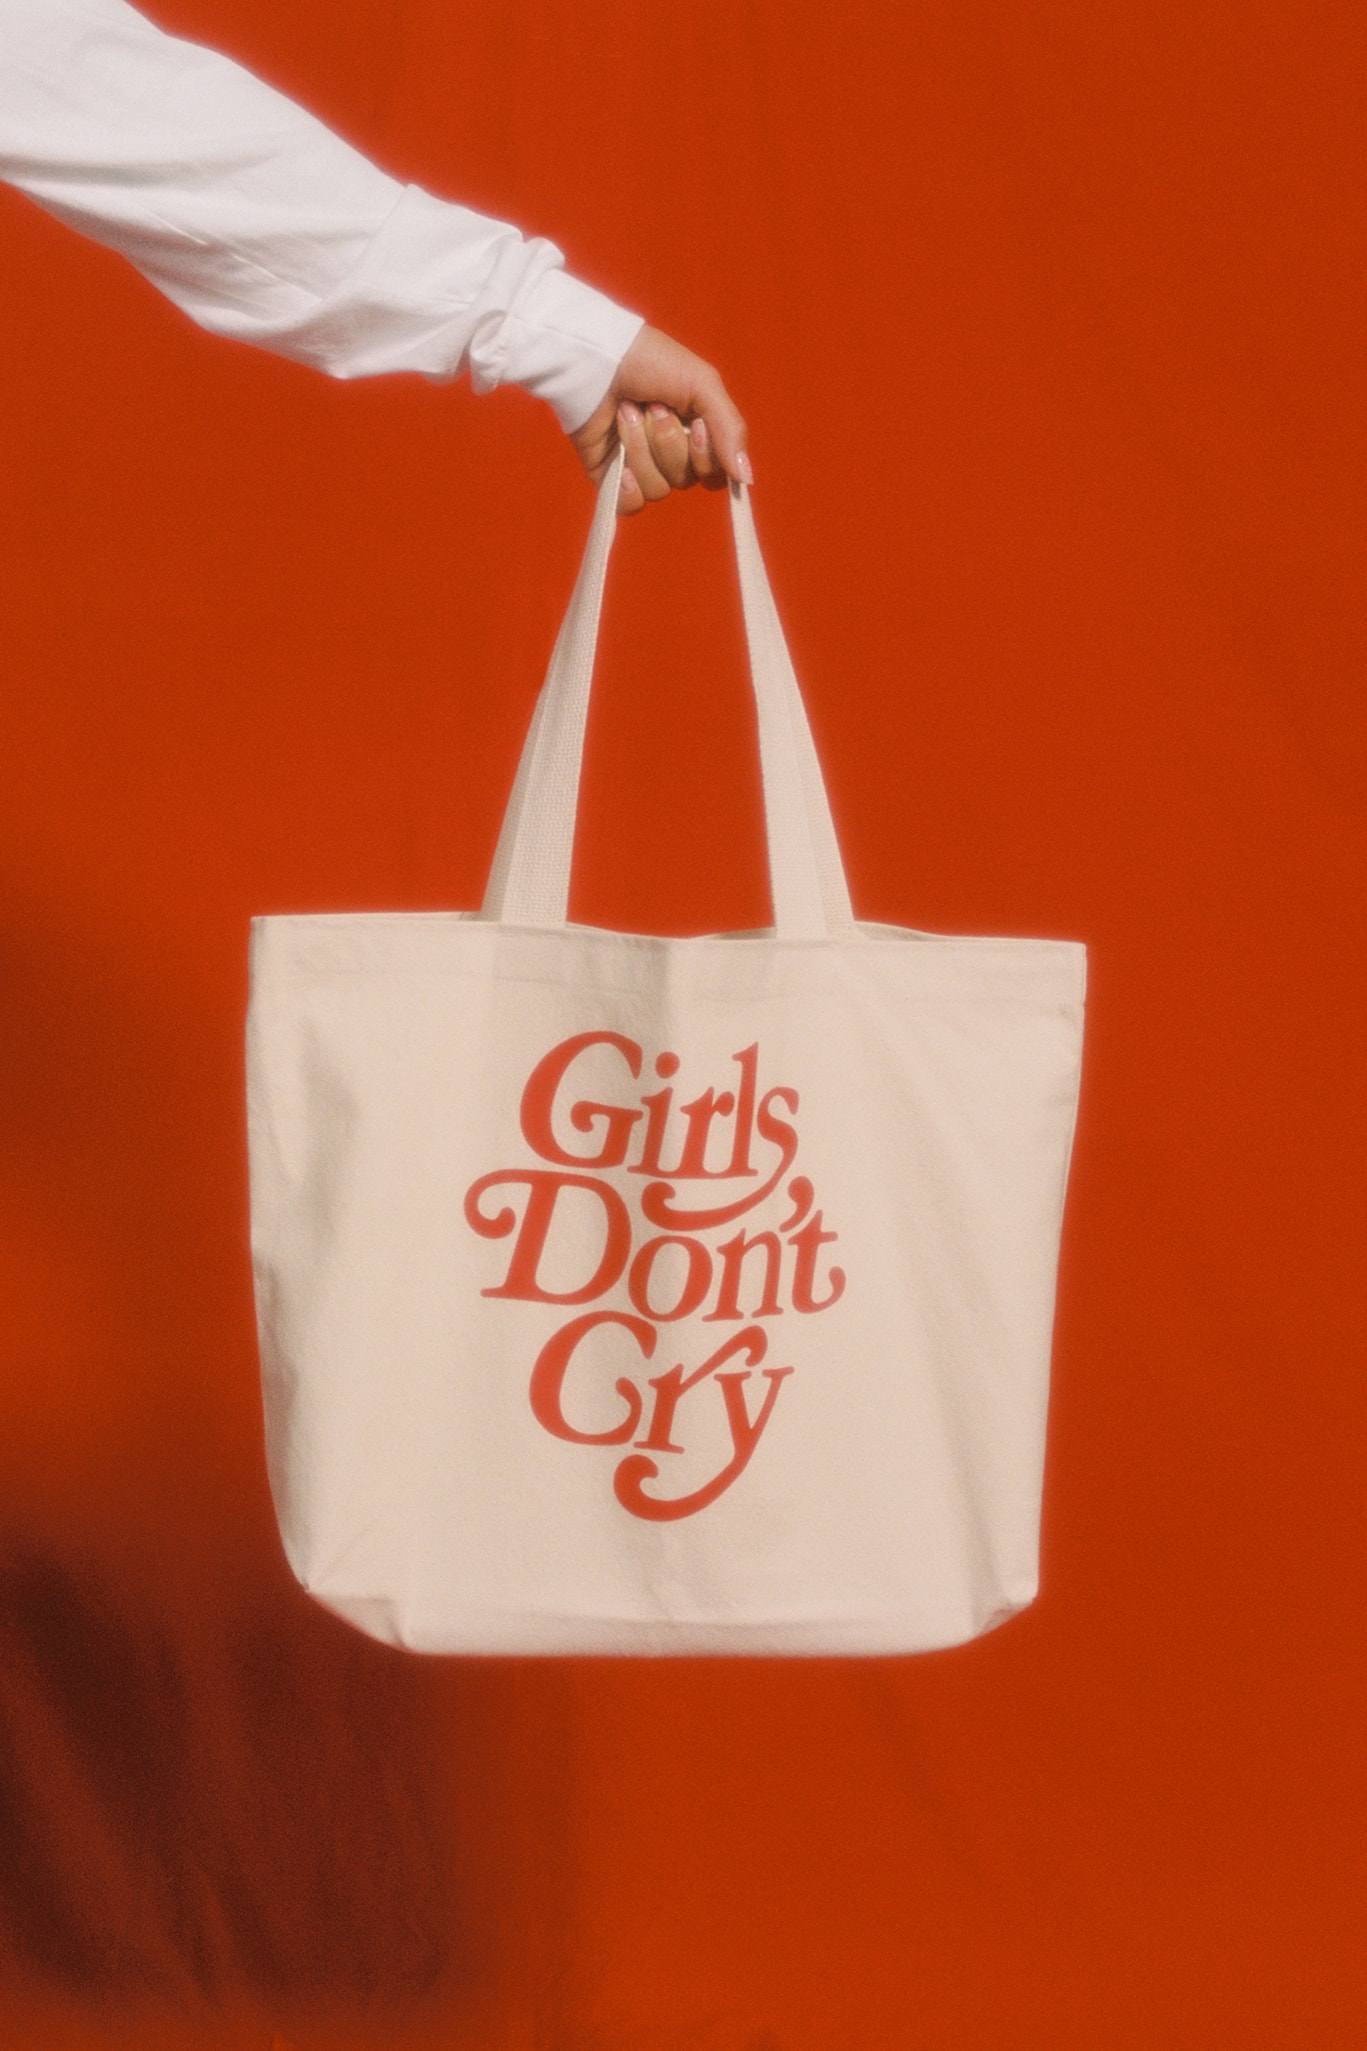 Girls Don't Cry Fall 2019 Collection Tote Bag Tan